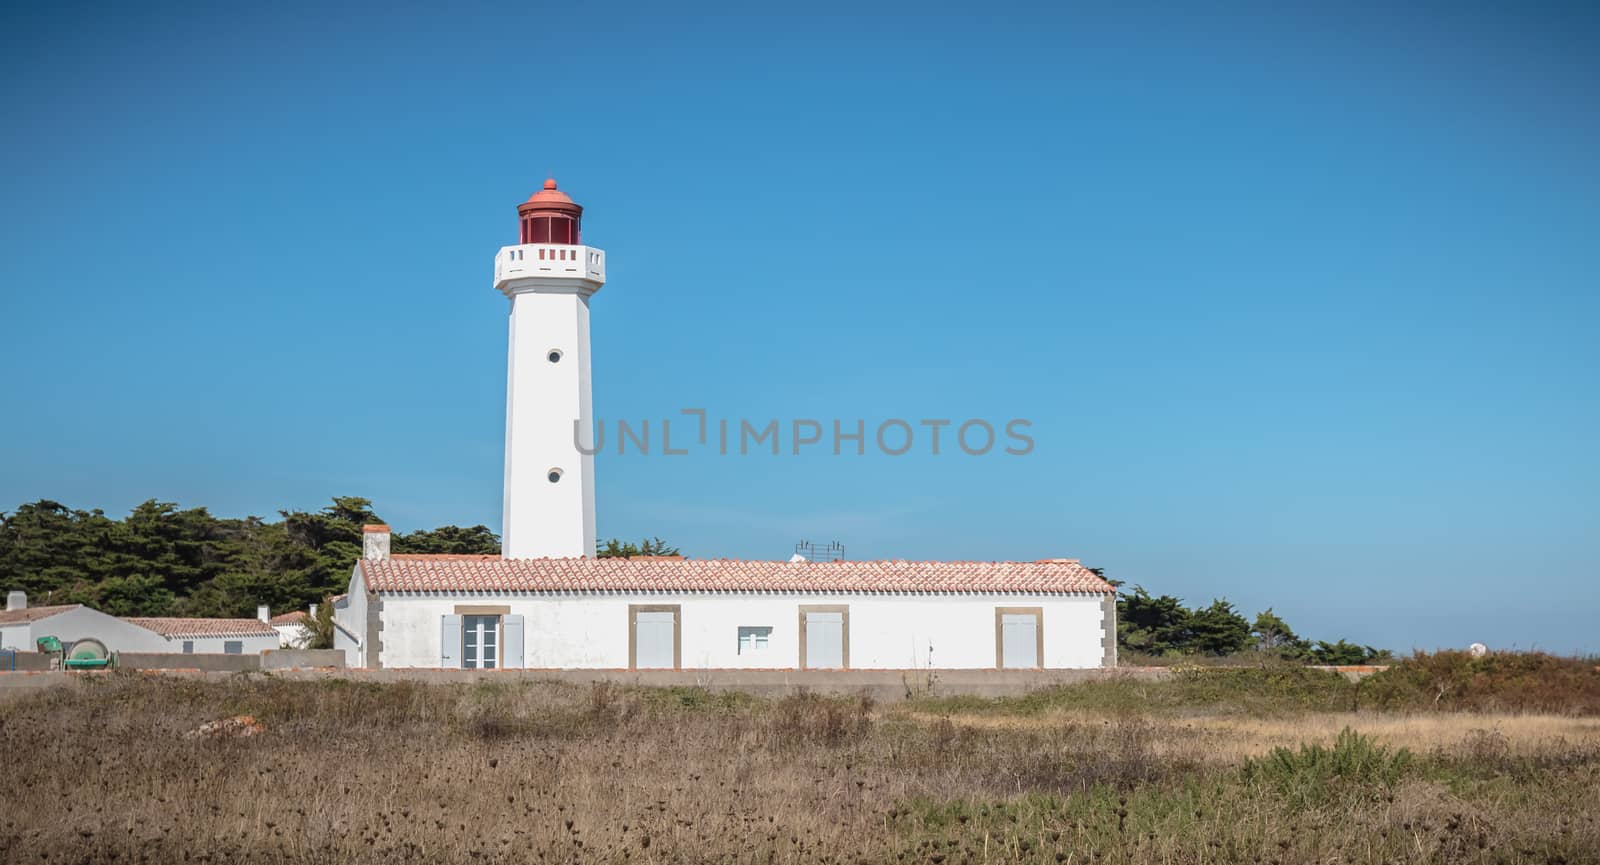 Port Joinville, France - September 17, 2018 - Architectural detail of the Corbeaux Marine Lighthouse on a summer day